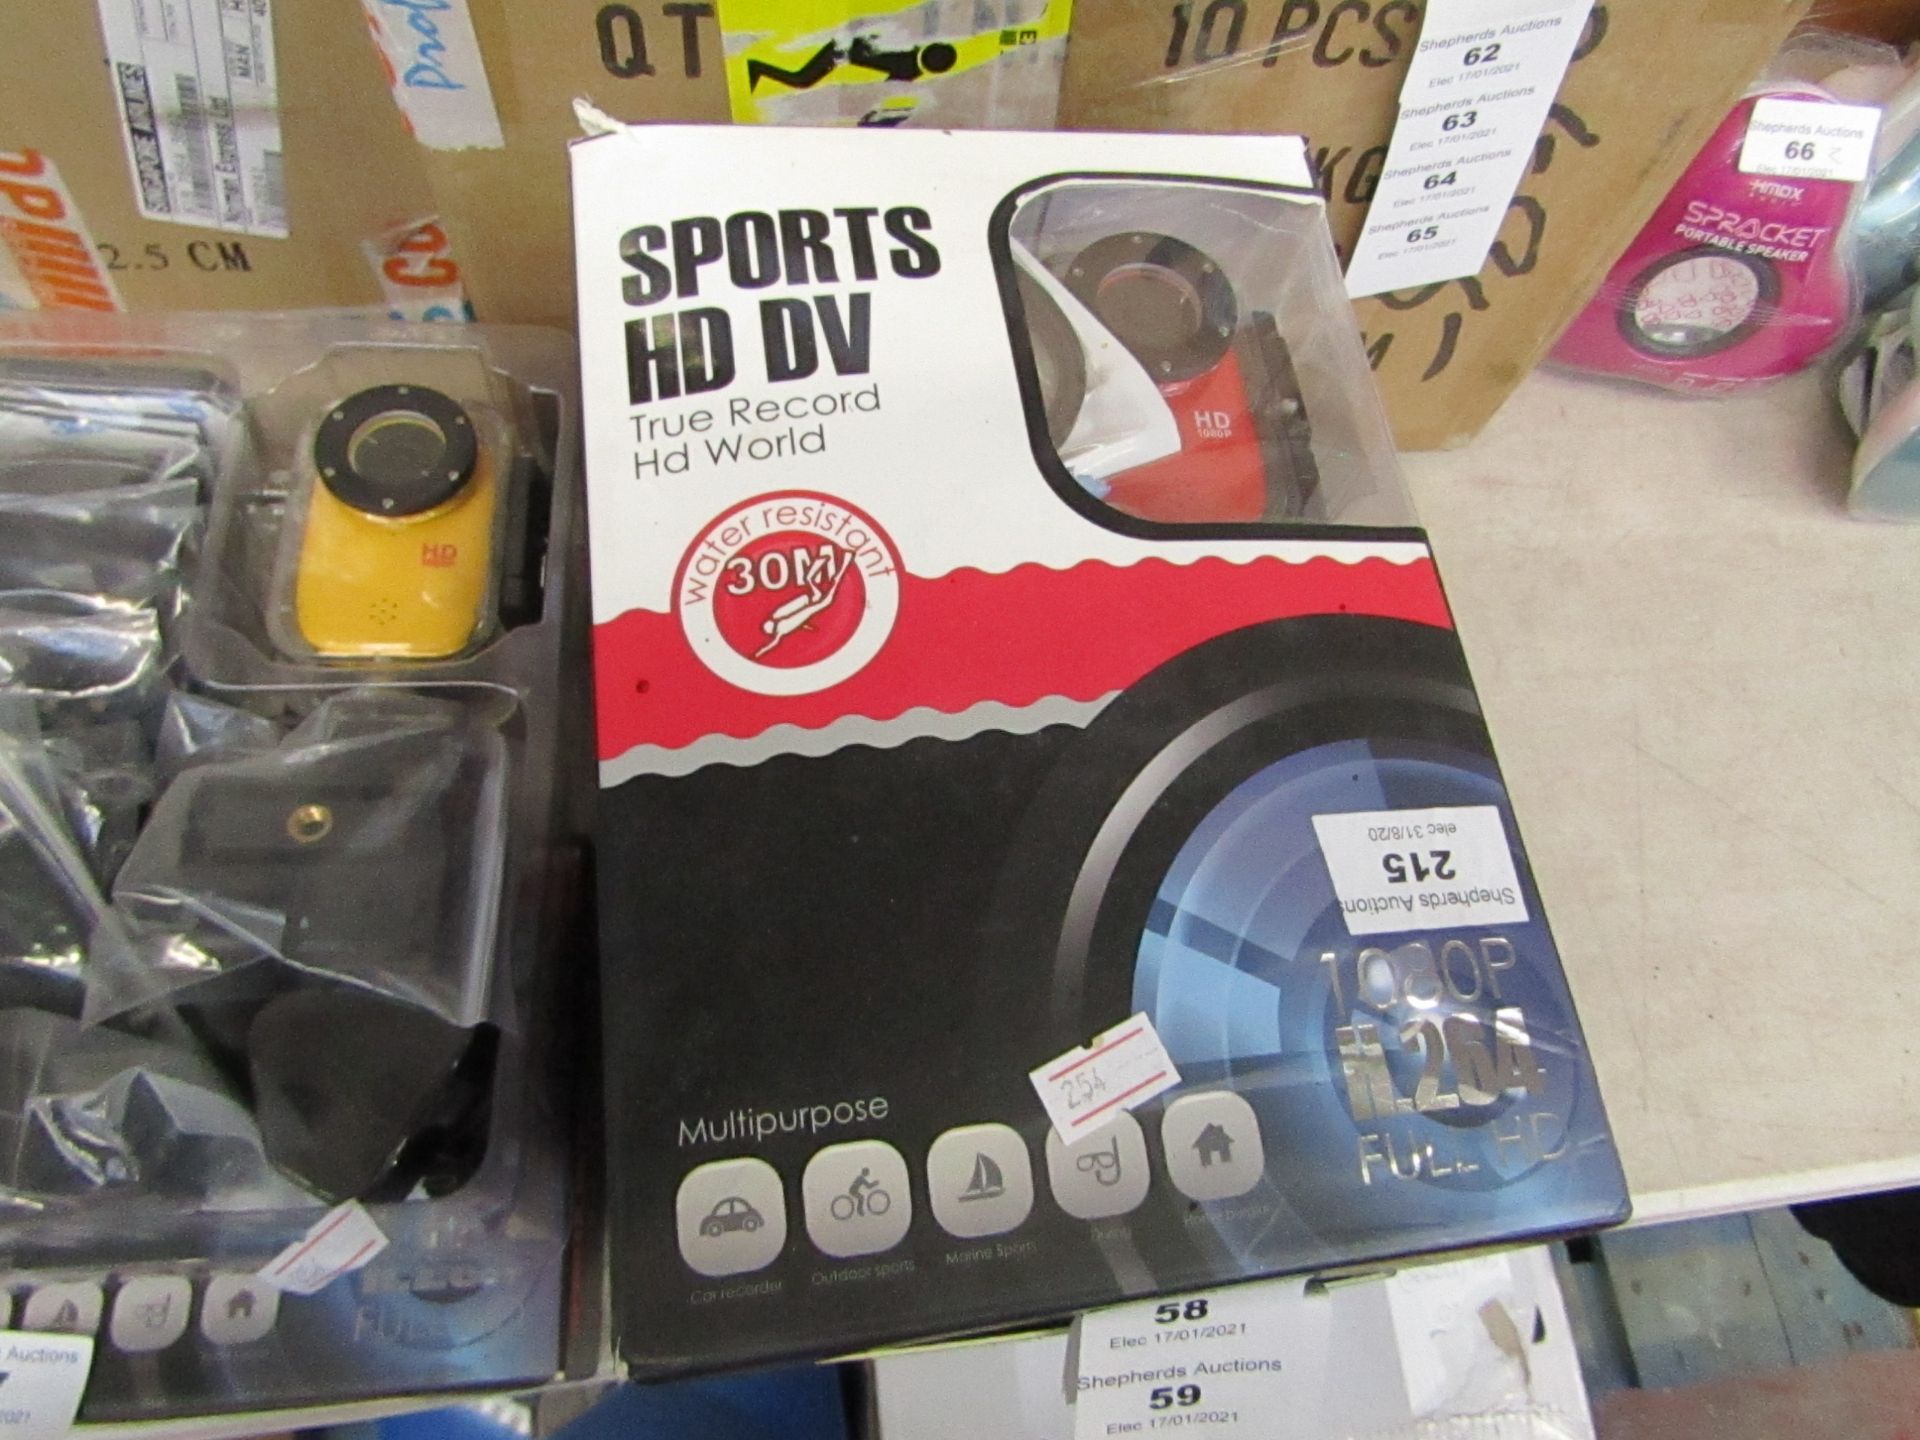 Sports HD DV action camera with accessories, tested working and boxed.